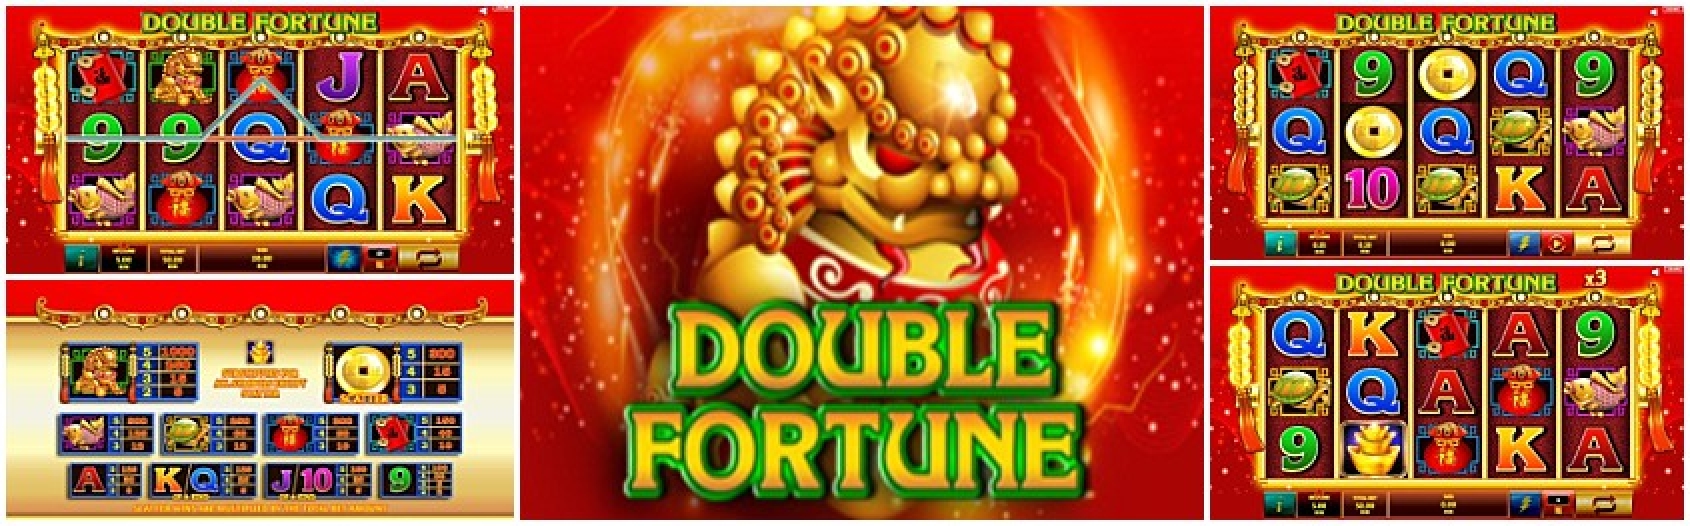 The Double Fortune Online Slot Demo Game by Givme Games